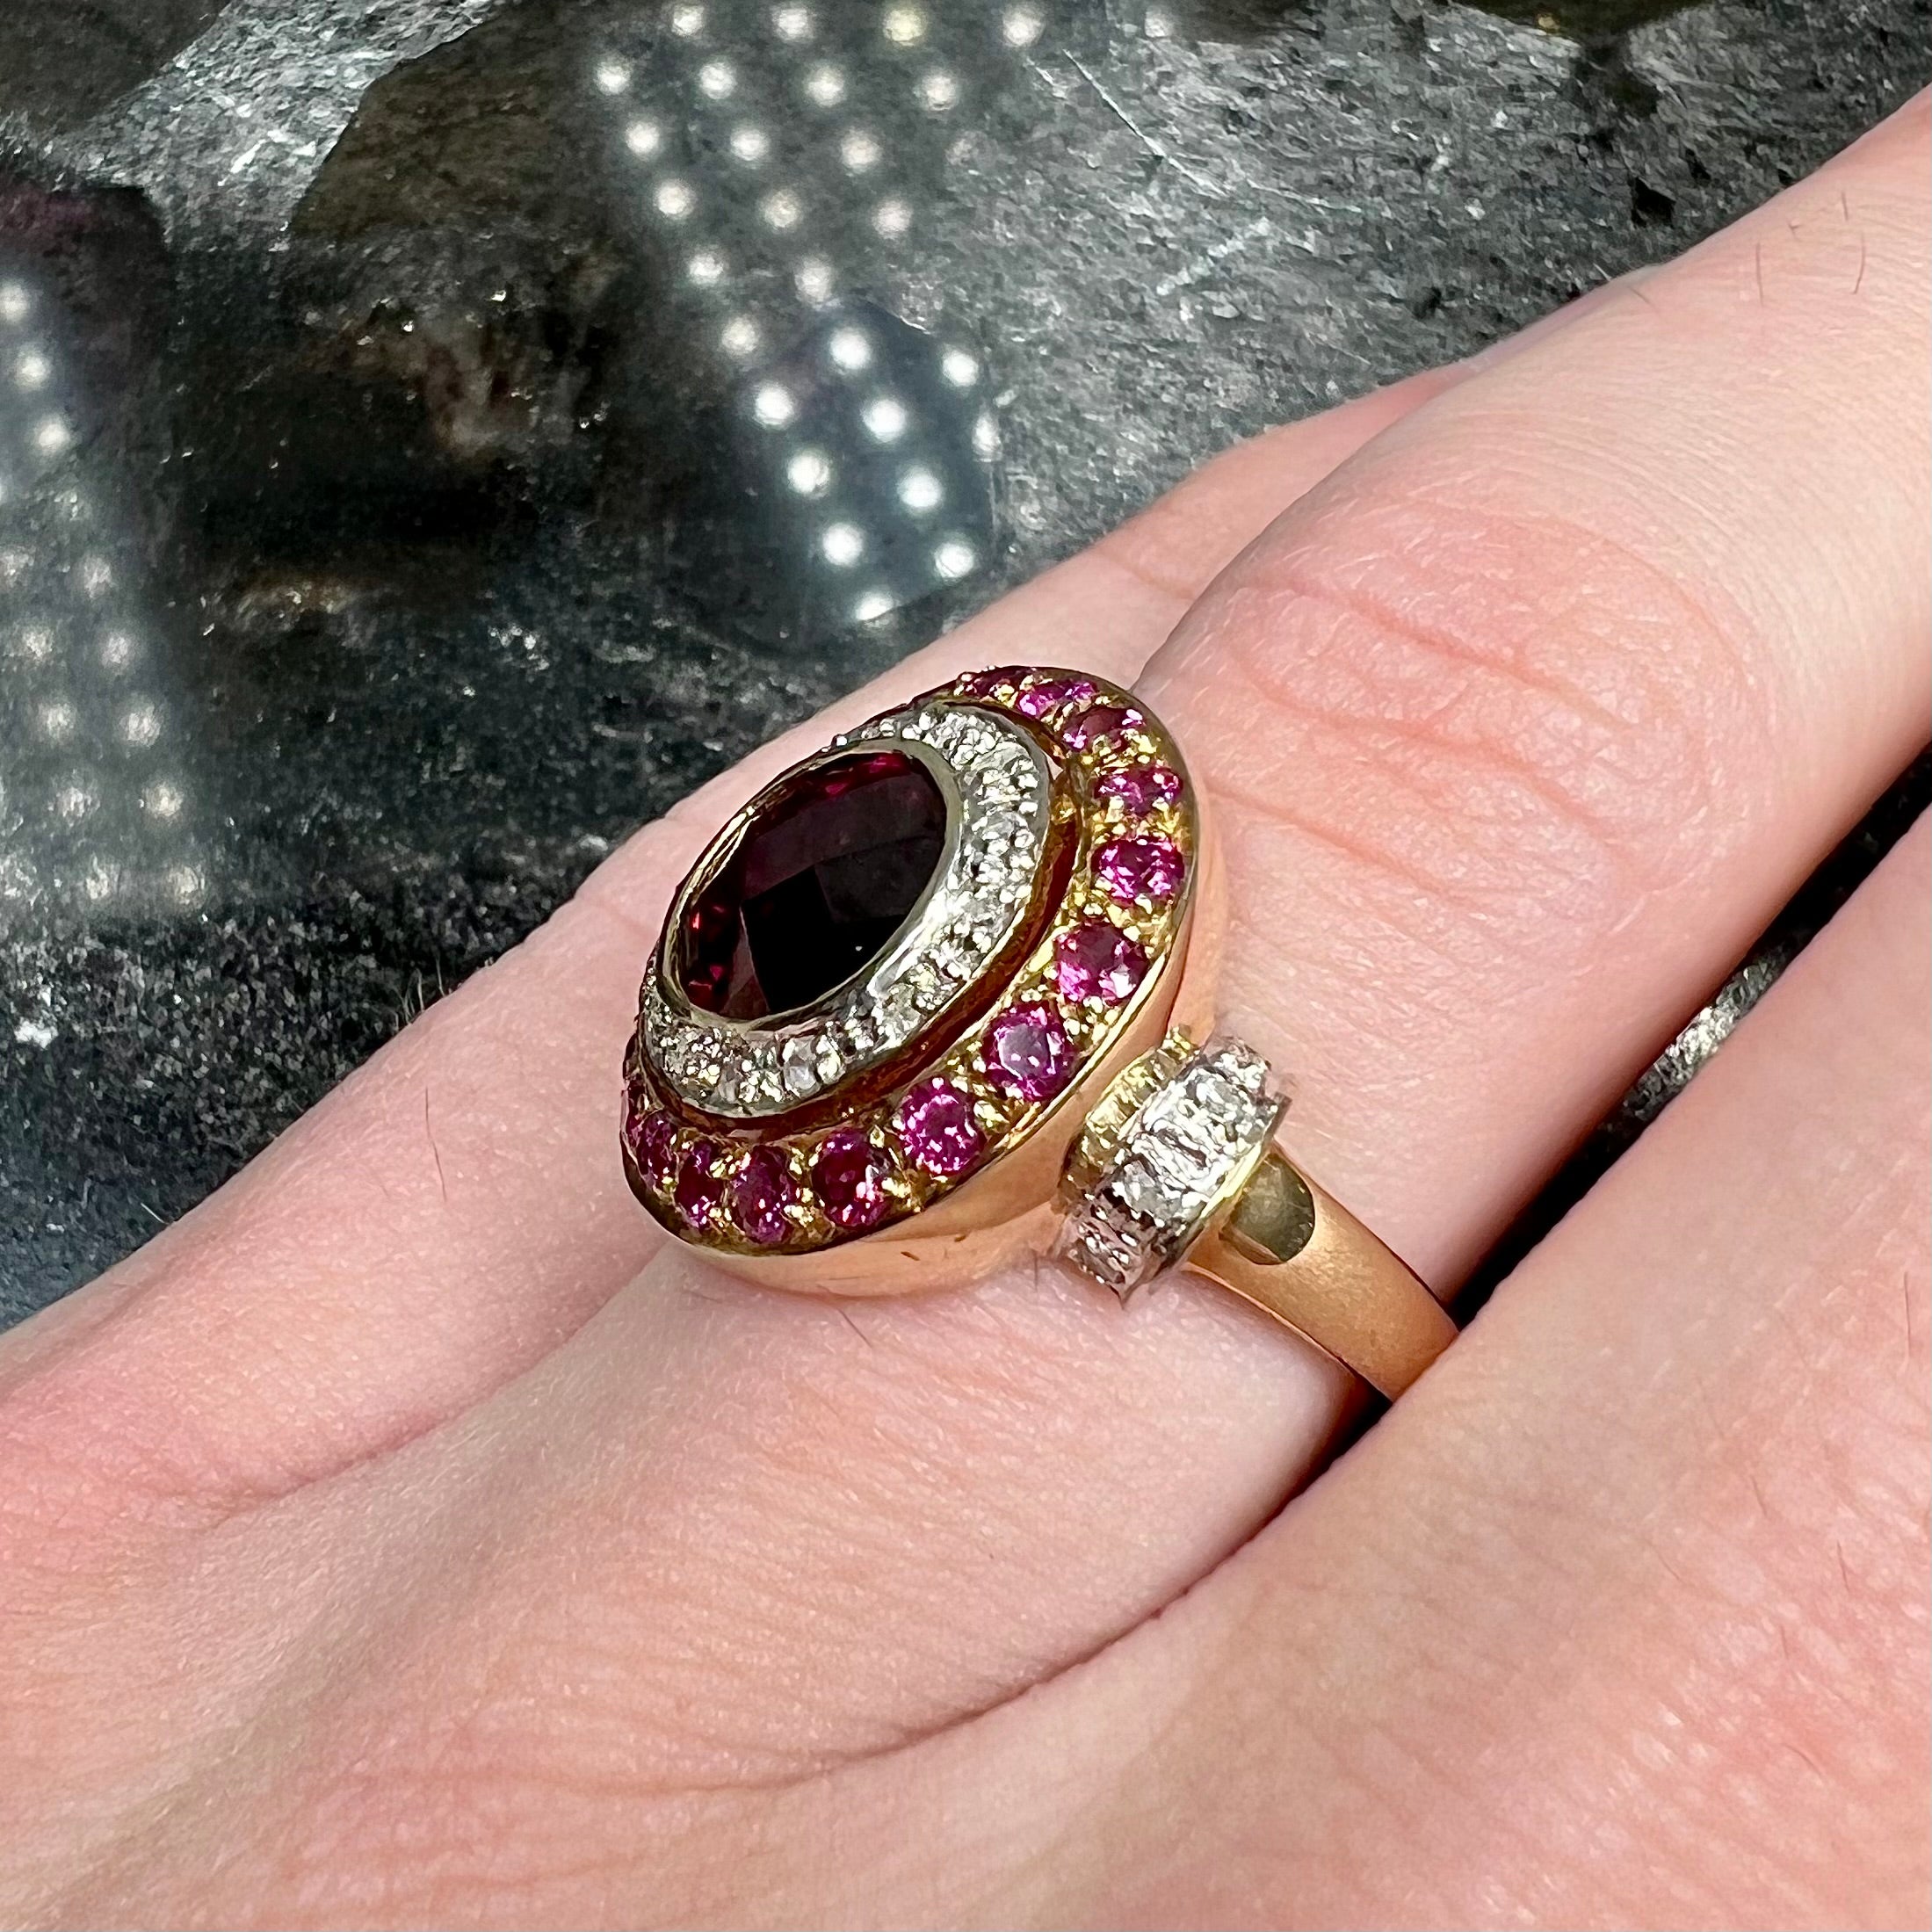 READY TO SHIP: Fiorella ring in 14K white gold, natural rhodolite garnet  oval cut 8x6 mm, accents lab grown diamonds and pink tourmalines, AVAILABLE  RING SIZES: 6.75-8.75US | Eden Garden Jewelry™